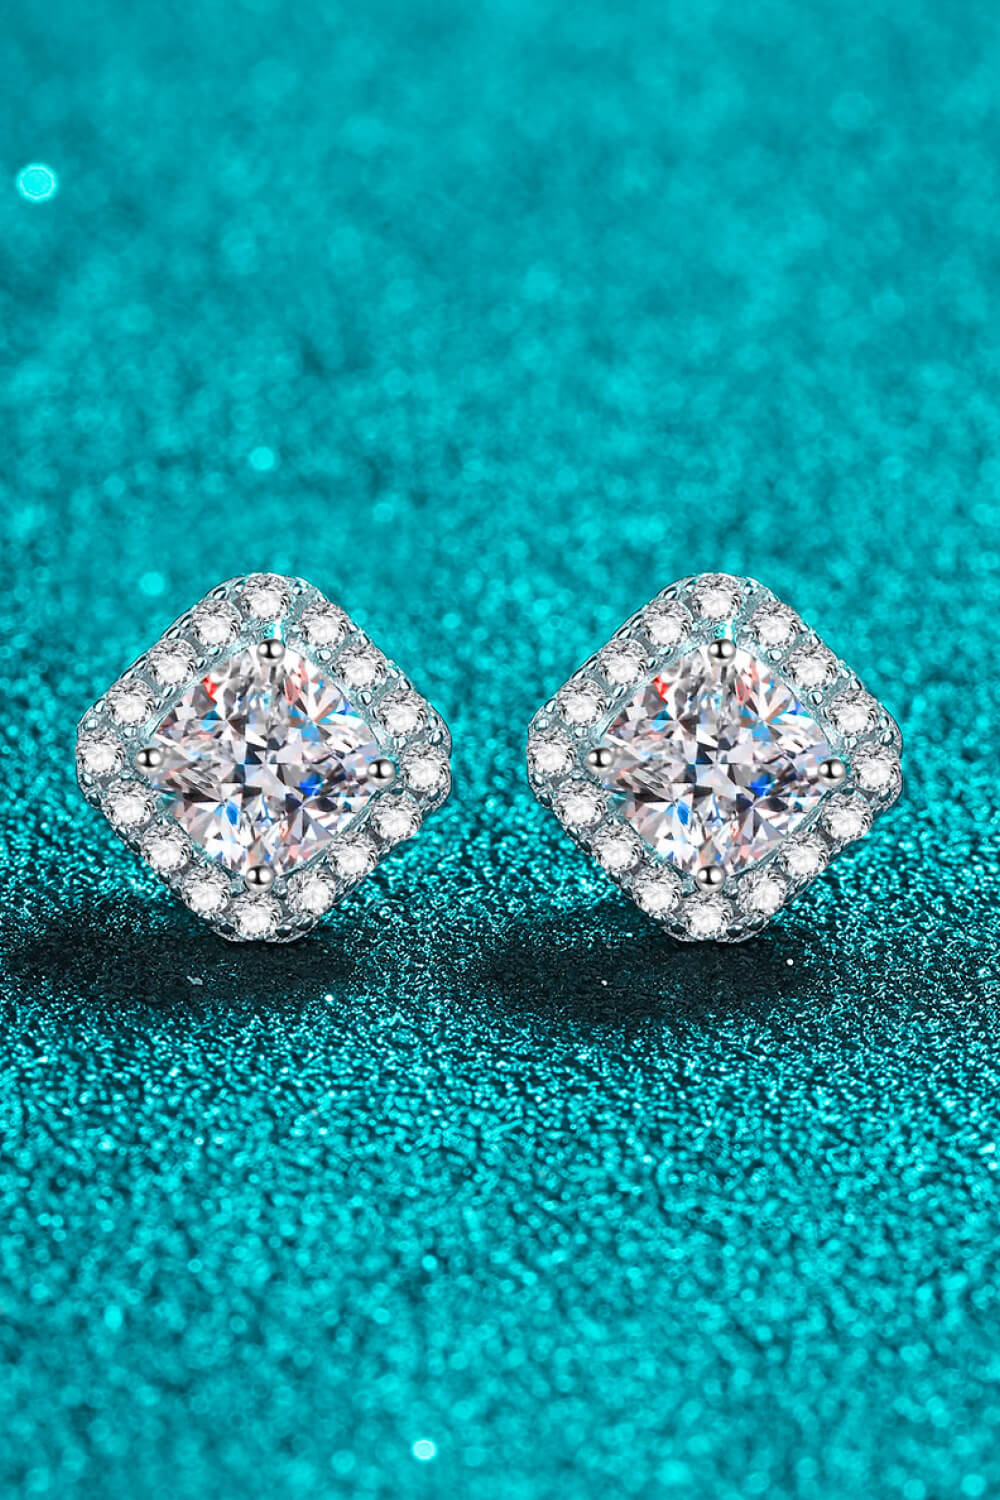 925 Sterling Silver Inlaid 2 Carat Moissanite Square Stud Earrings - Earrings - FITGGINS